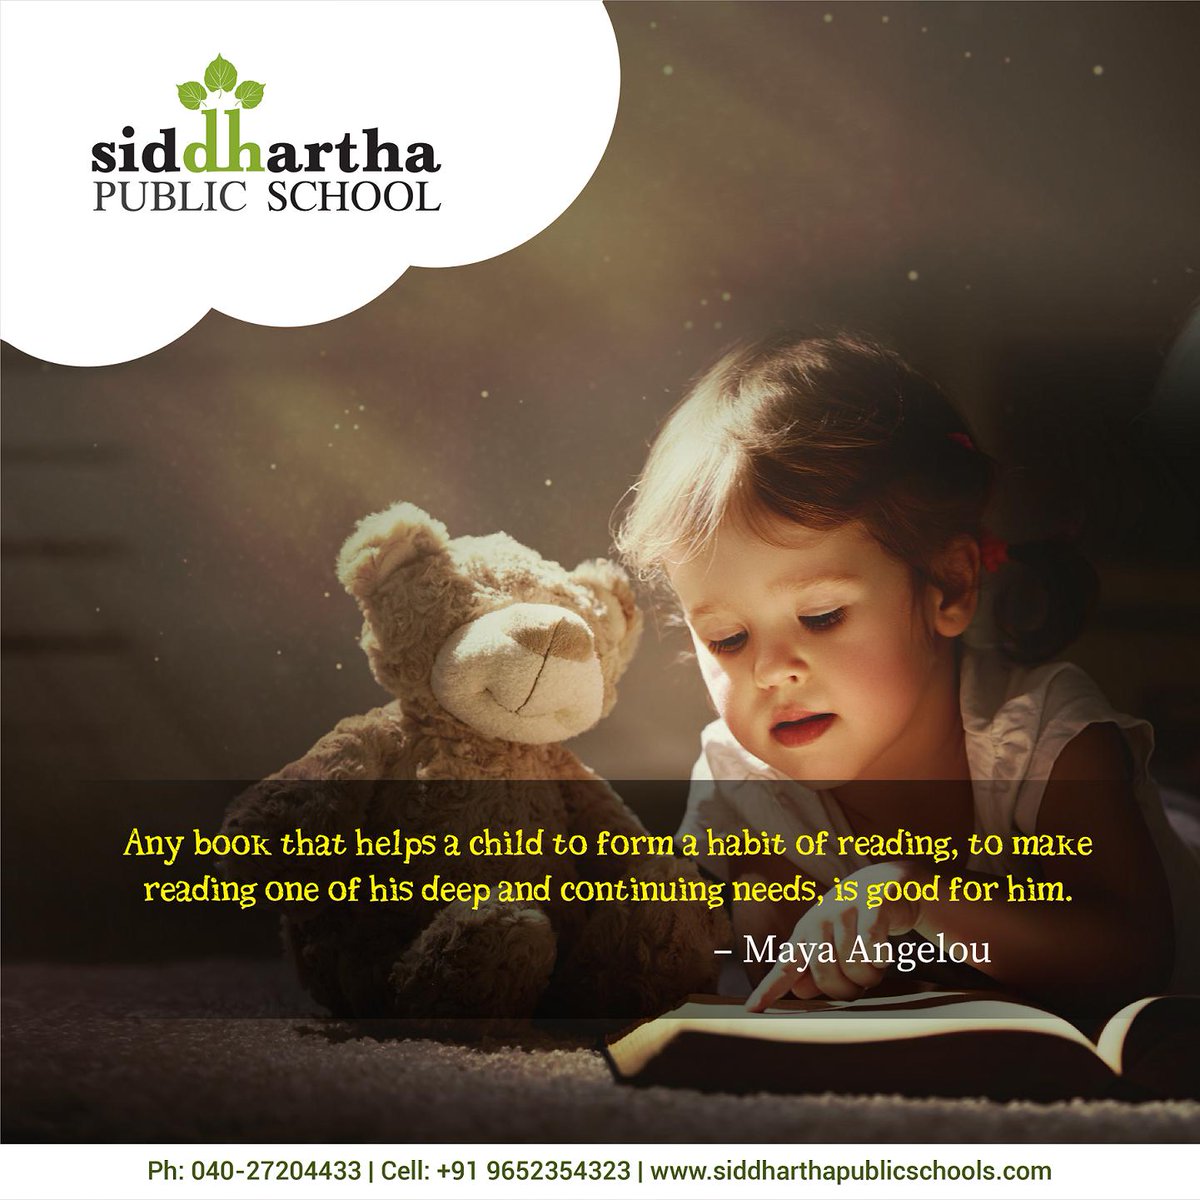 Education Quotes:

Any book that helps a child to form a habit of reading, to make #reading one of his deep and continuing needs, is good for him. – Maya Angelou

#MayaAngelou #YourChildHabits #ChildrenReadingSkills #Quotes #EducationQuotes